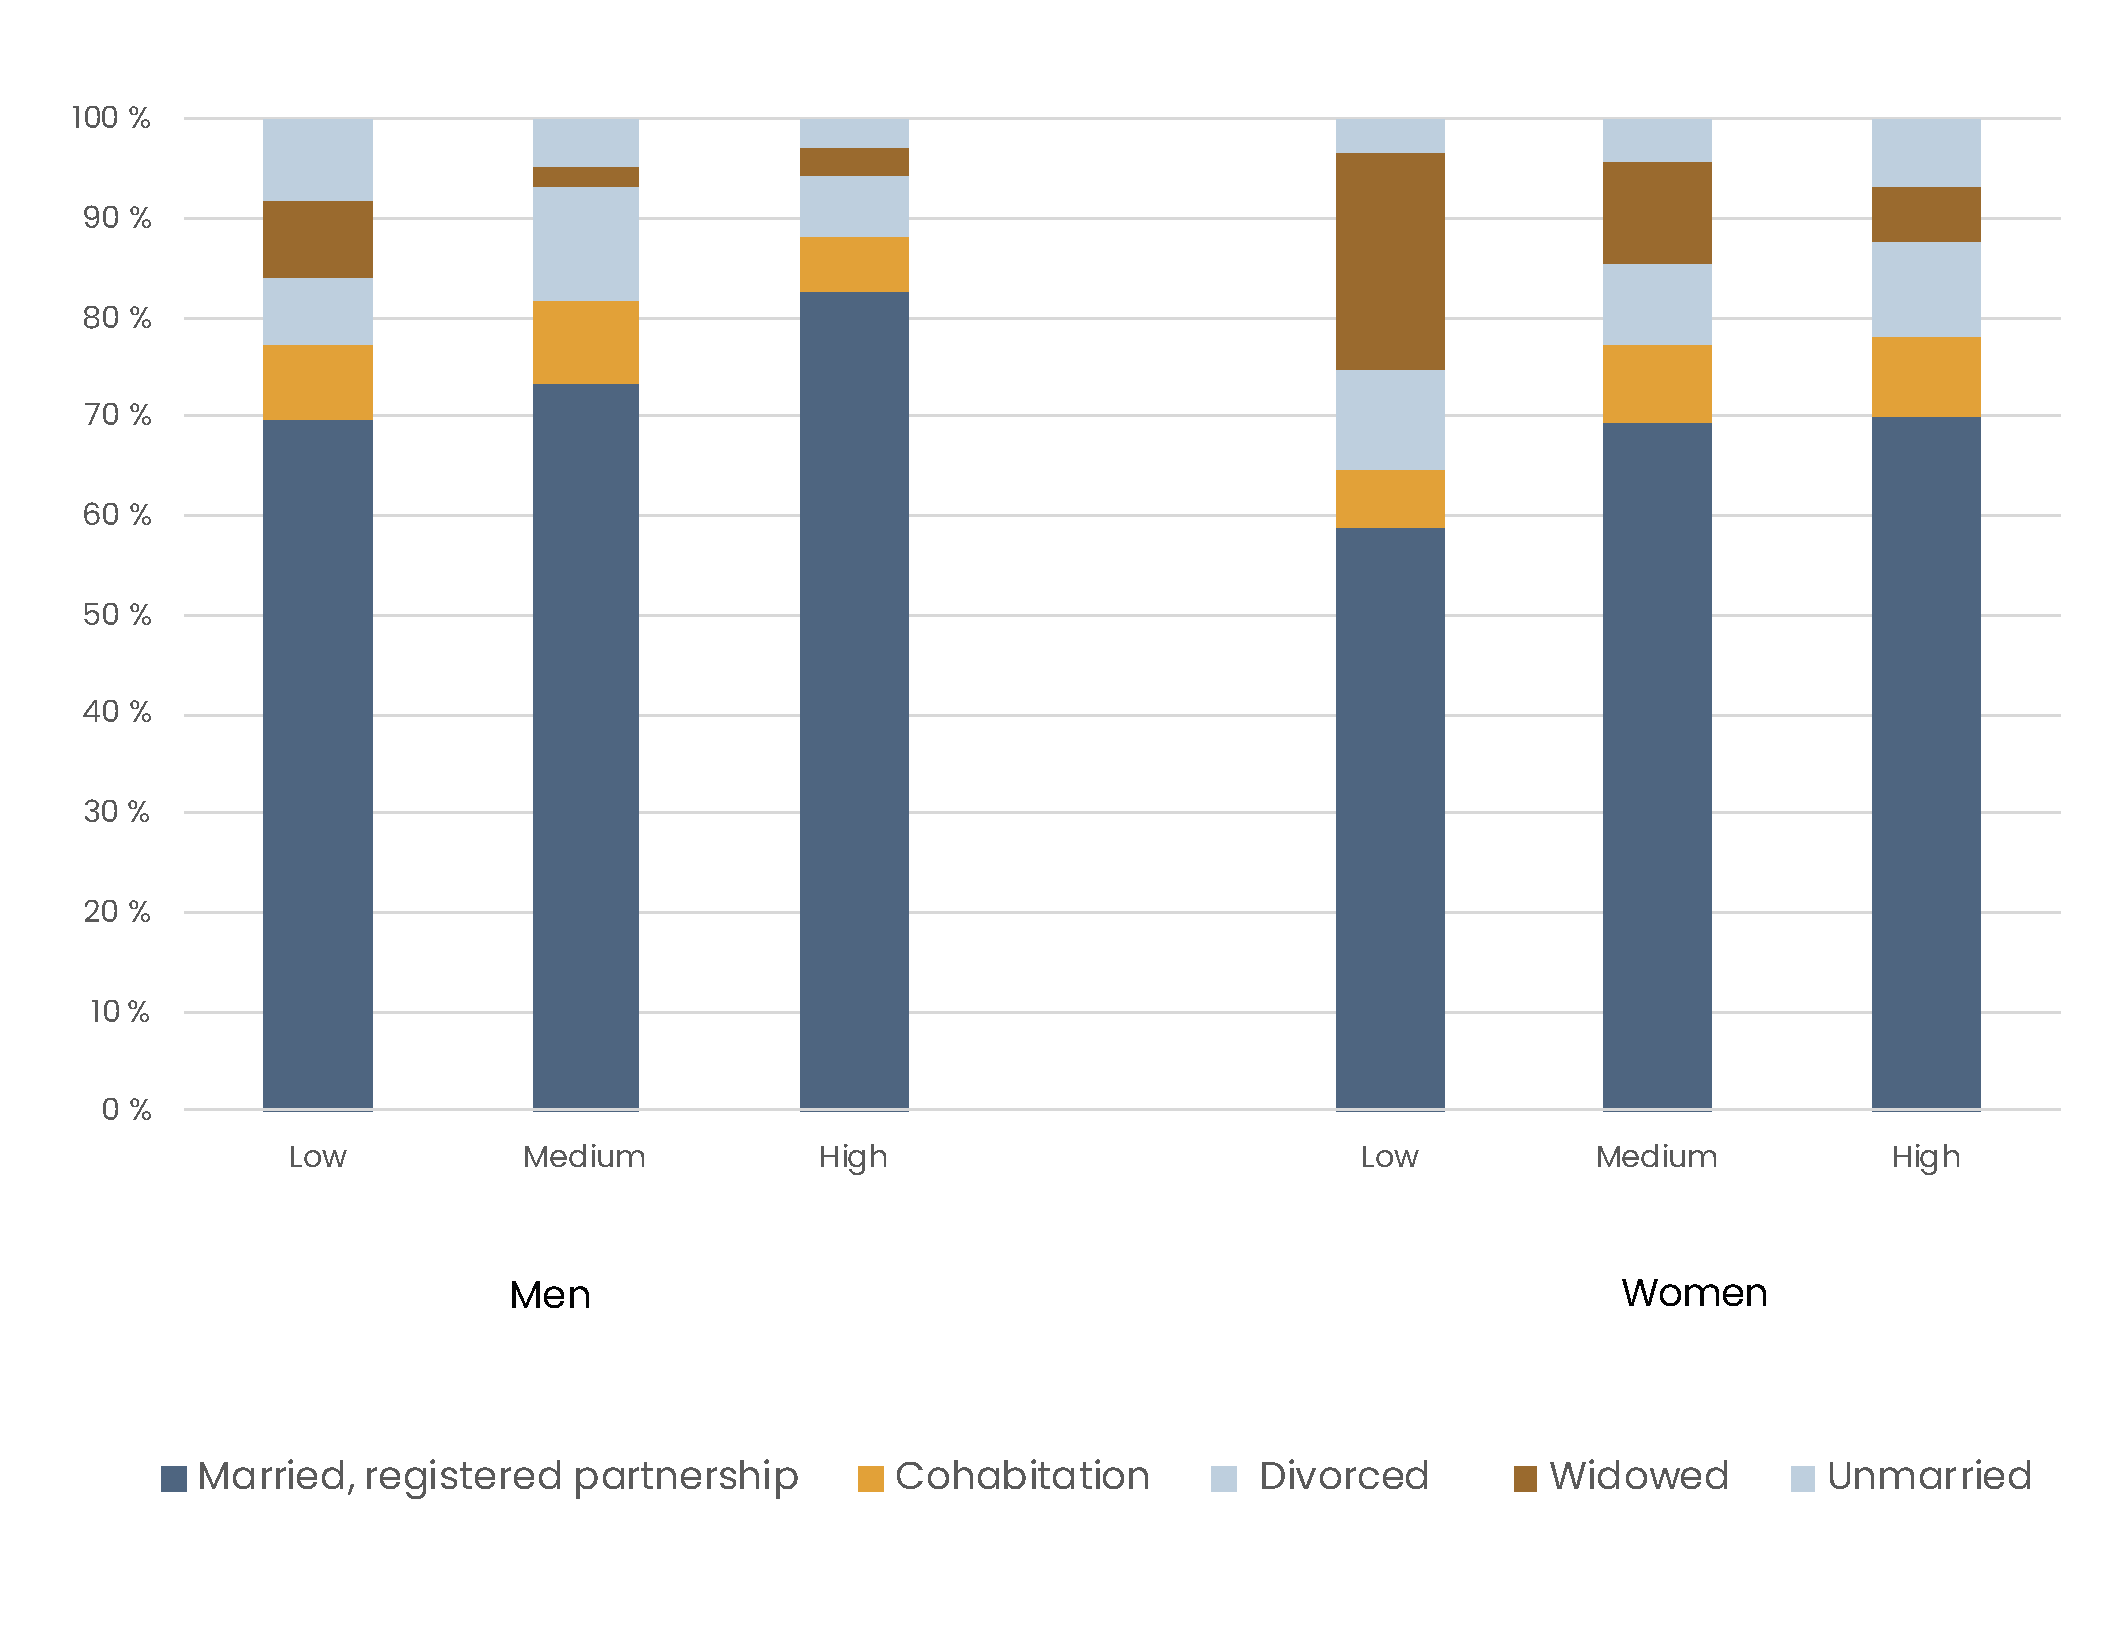 The bar chart points to some educational differences in the current relationship status among Finnish mena and women.